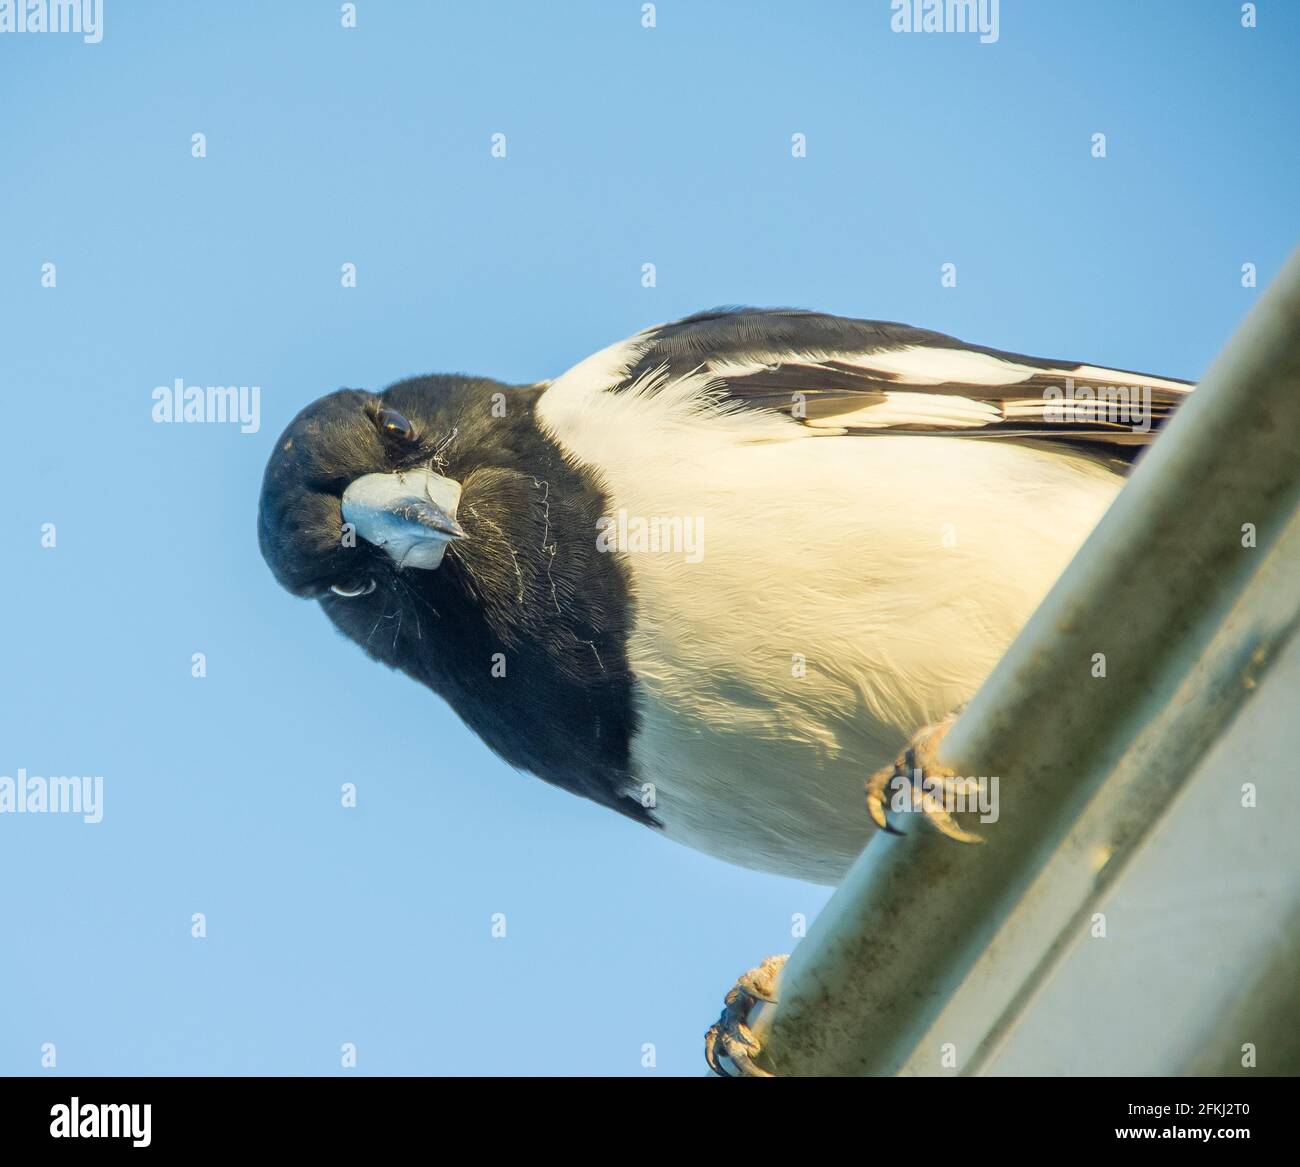 Close-up of Pied butcherbird, Cracticus nigrogularis, perched roof looking down towards camera. Queensland, Australia. Clear sunny blue sky. Stock Photo